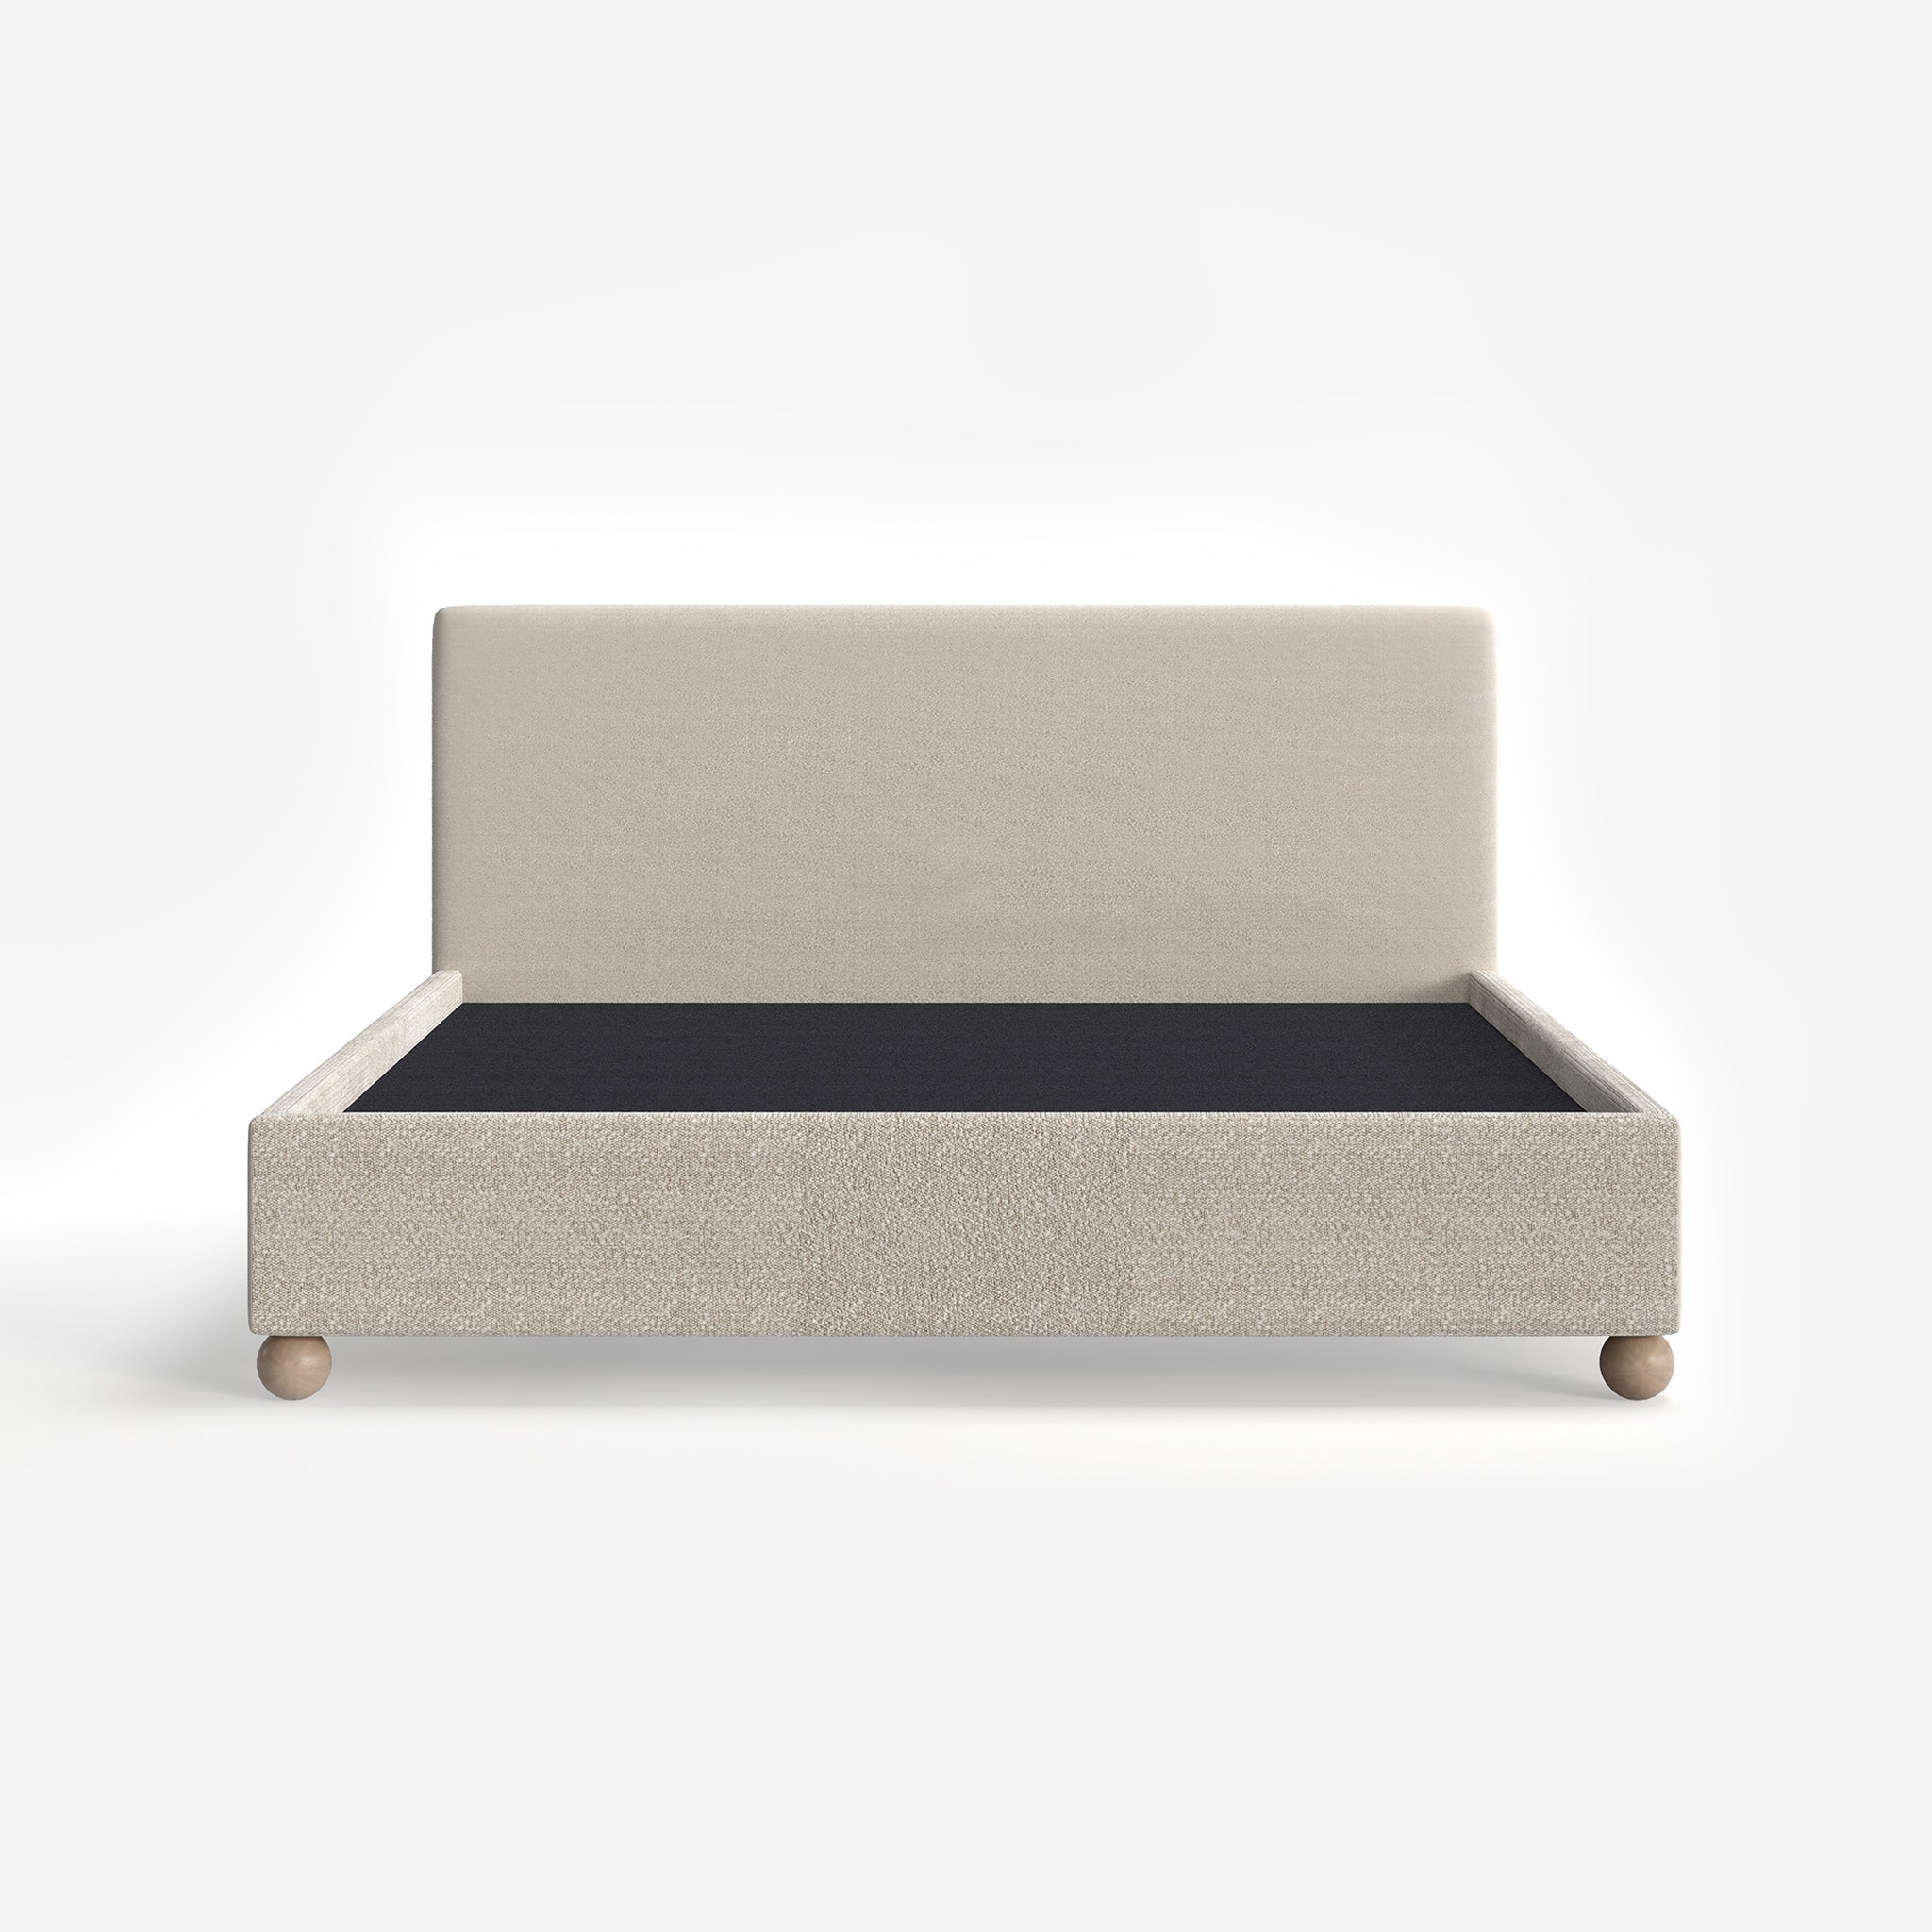 O'Halloran Beige Boucle Upholstered Bed with end-lift Ottoman Storage, Contemporary Interiors, Online Shopping, Craftsmanship, Wooden feet, Bazaar